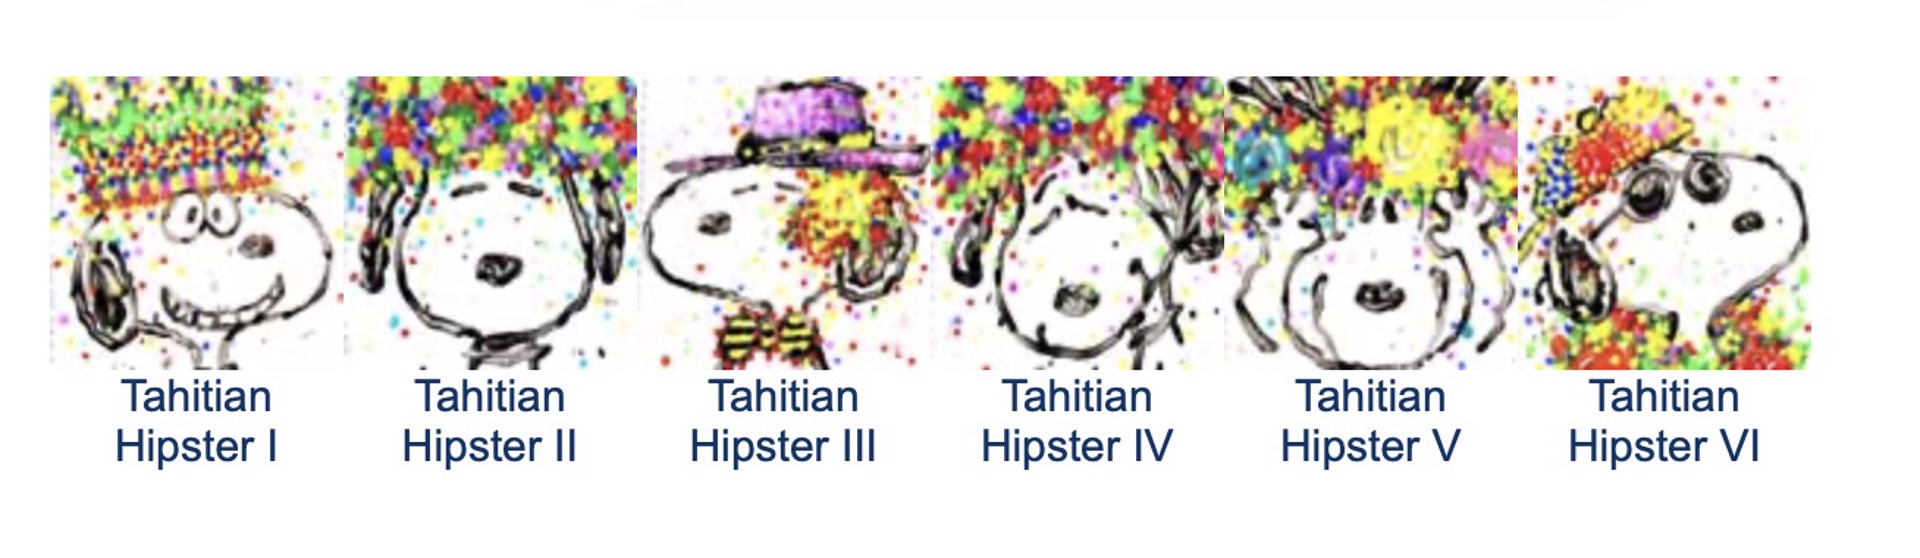 Tahitian Hipster V by Tom Everhart